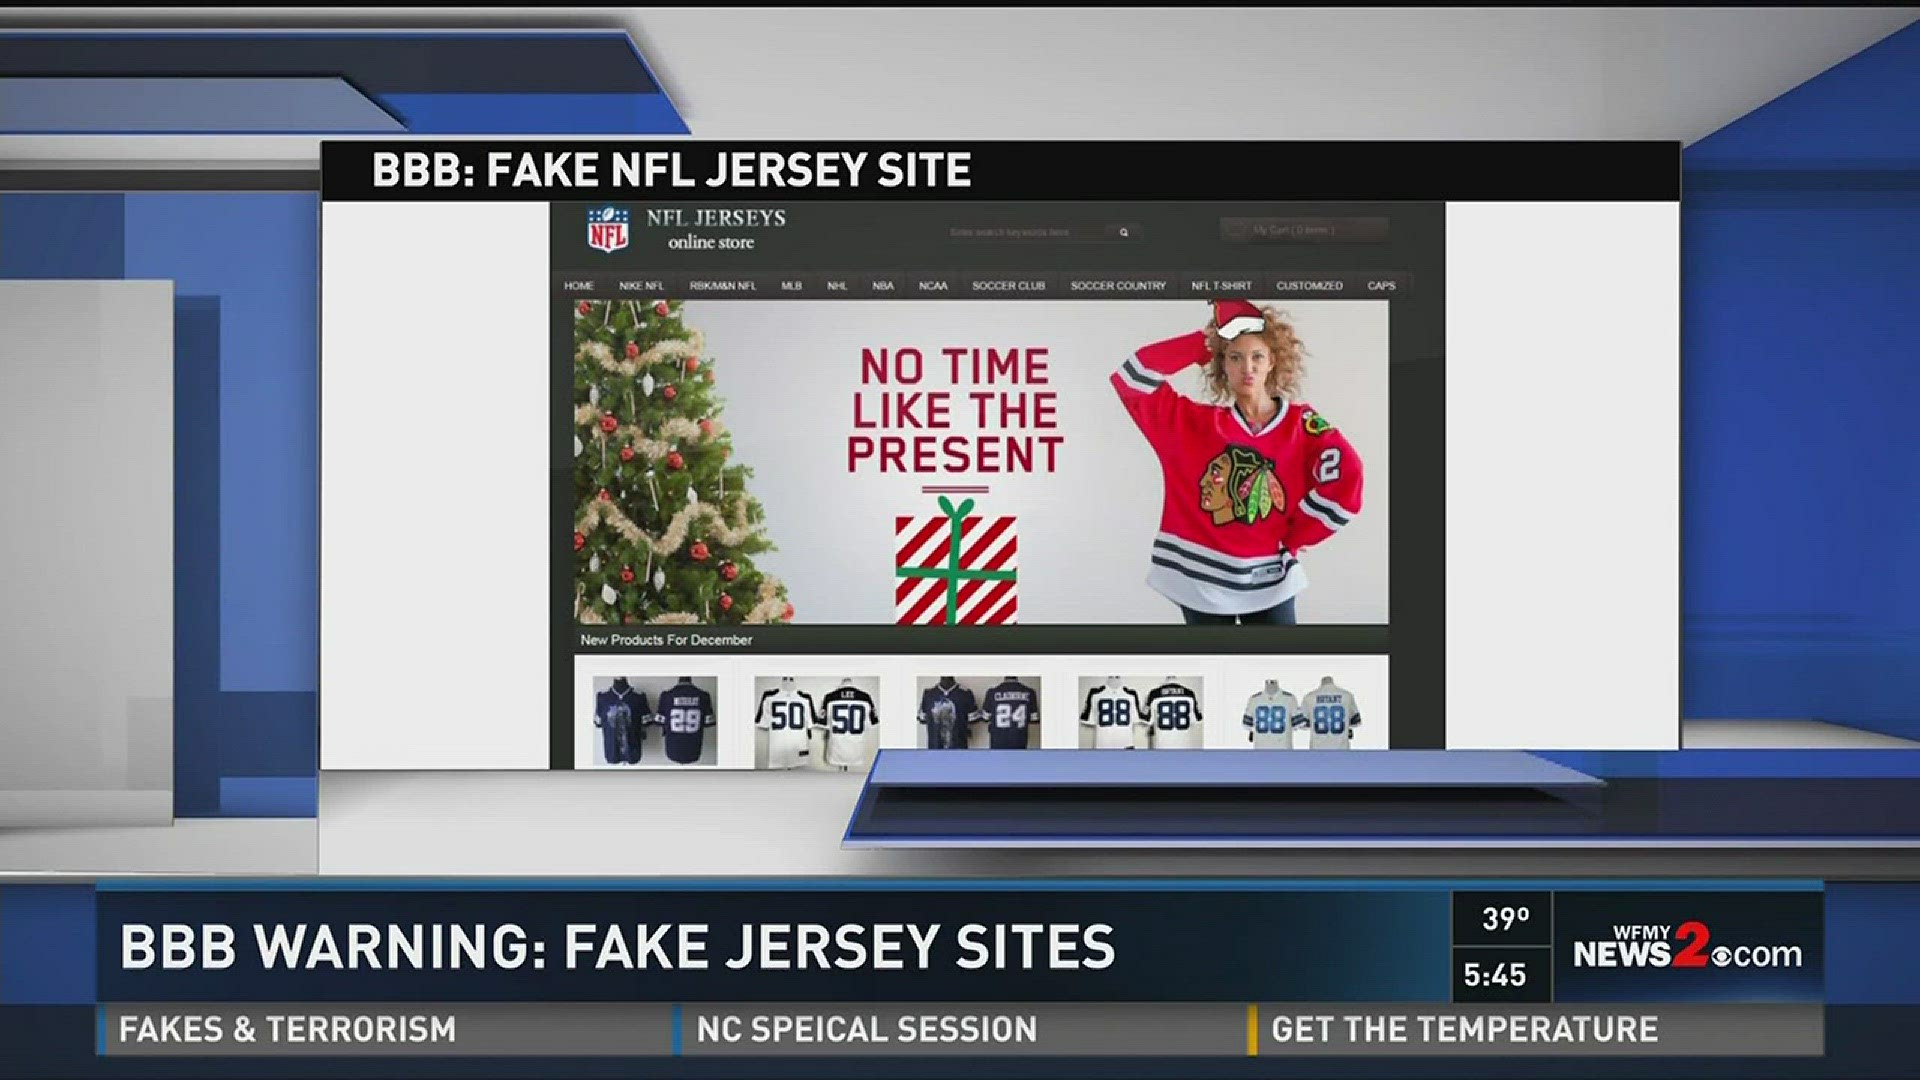 BBB Warning: Don't Order A Fake NFL Jersey!